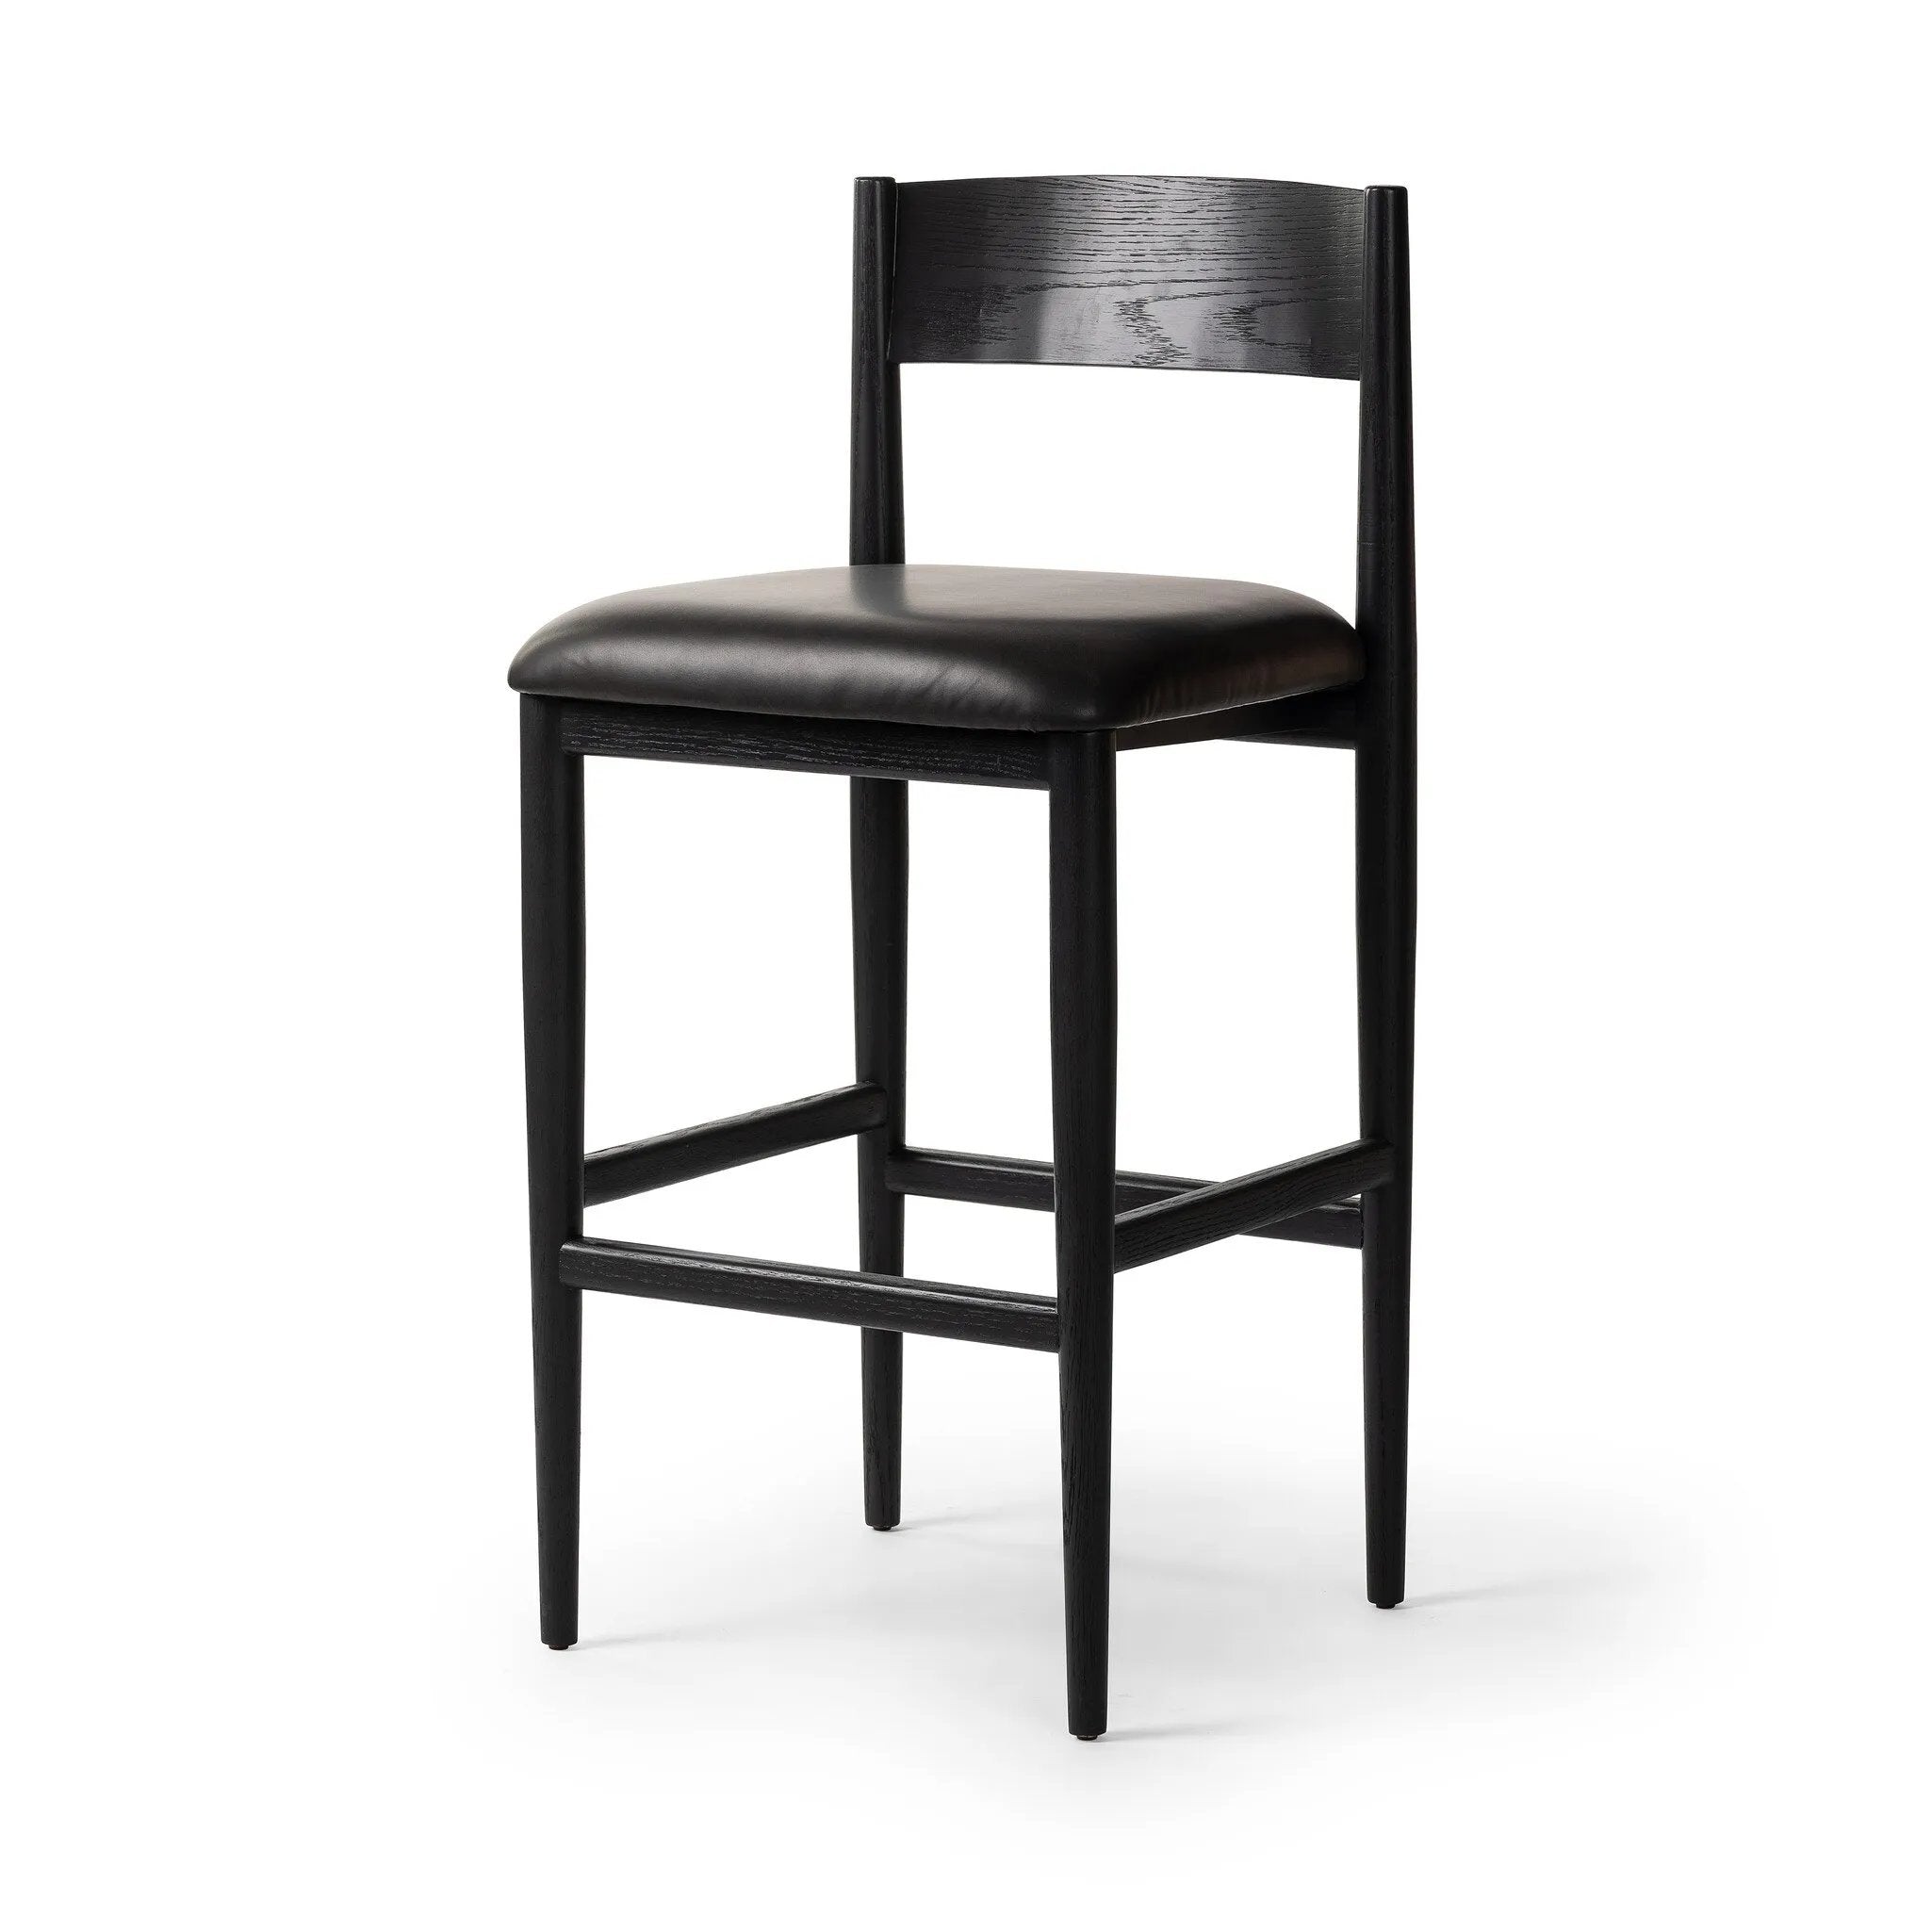 Monochromatic meets midcentury with this bar-height stool. Structured while comfortable, the tapered-leg chair pairs an ebony wood frame with a faux leather cushion.Collection: Ashfor Amethyst Home provides interior design, new home construction design consulting, vintage area rugs, and lighting in the Charlotte metro area.